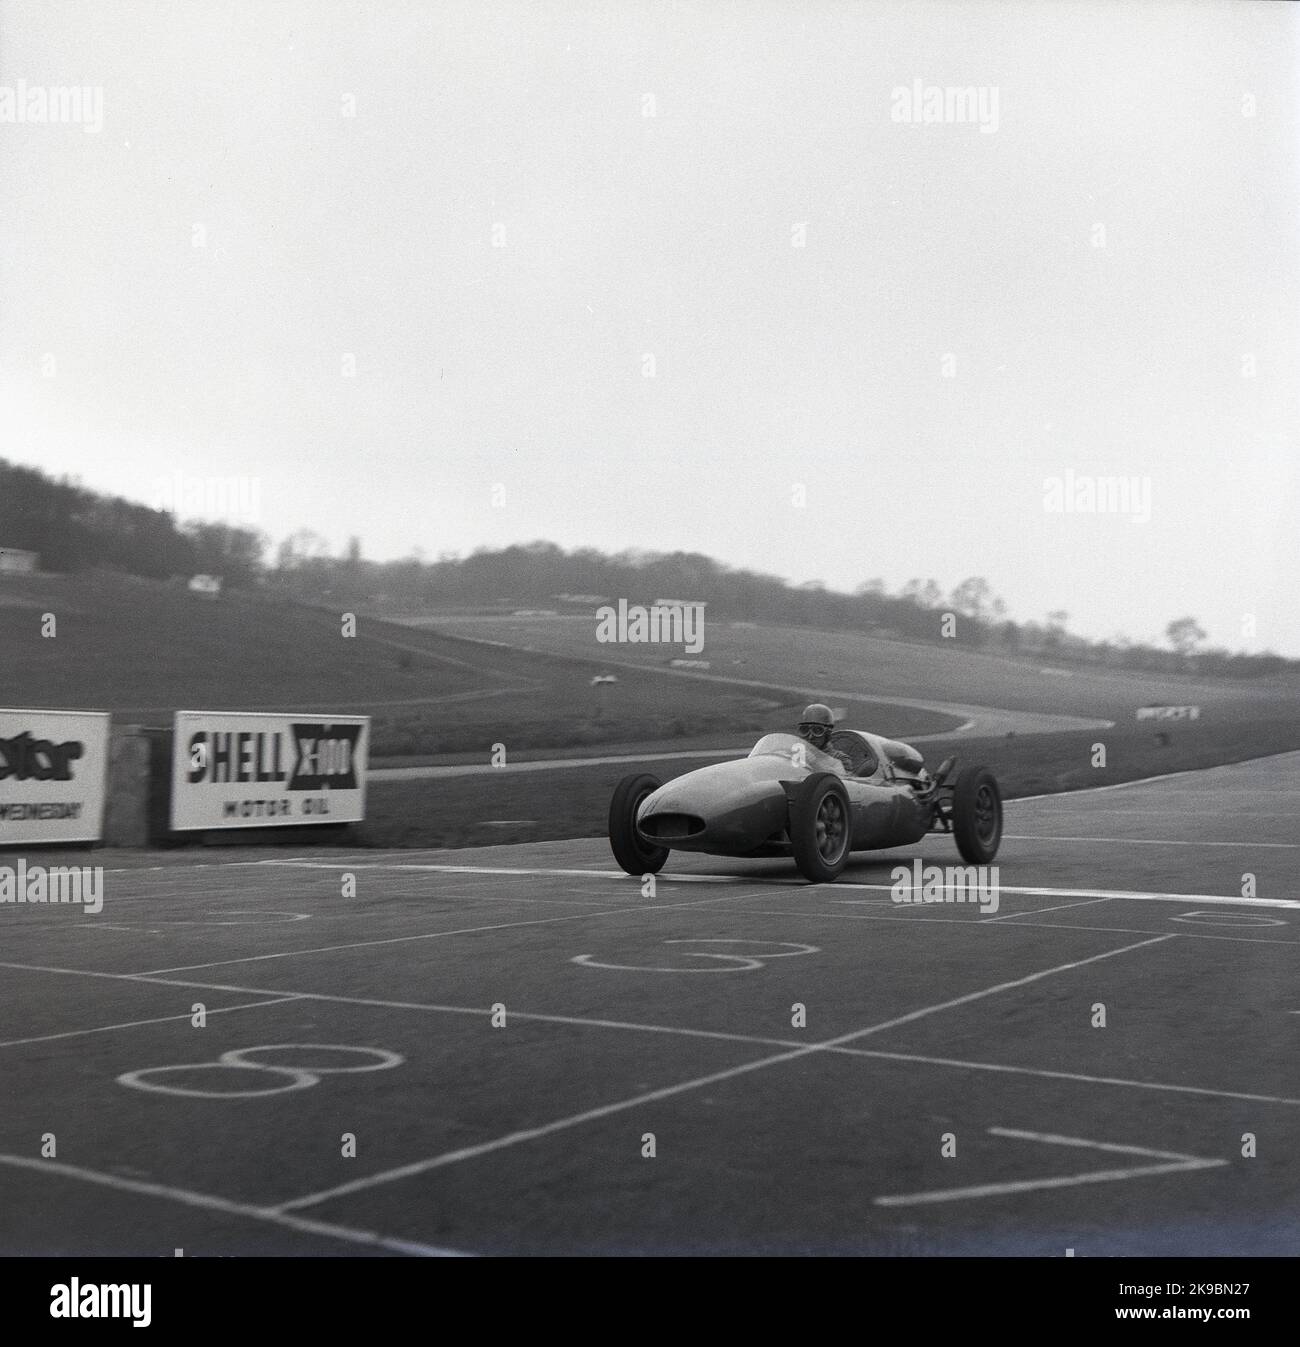 1959, historical, a Cooper motor racing car crossing the finishing line at the  Brands Hatch motor racing circuit, Kent, England, UK. At this time, the circcuit was home to the Cooper's Racing Driver's School. Stock Photo